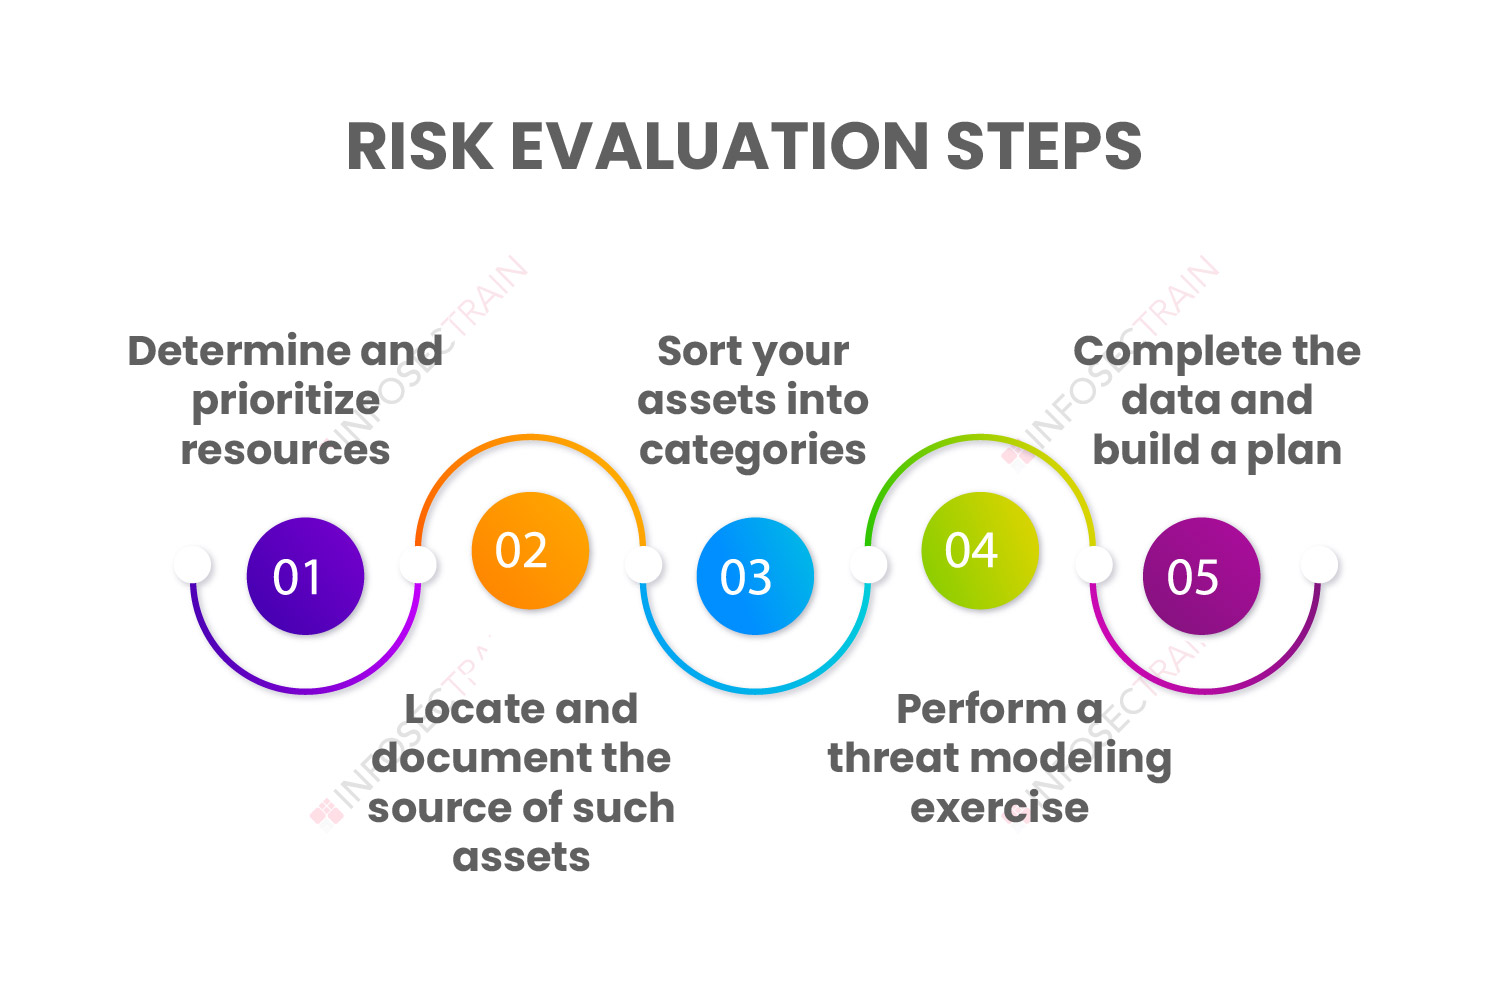 Steps in the Risk Evaluation Process